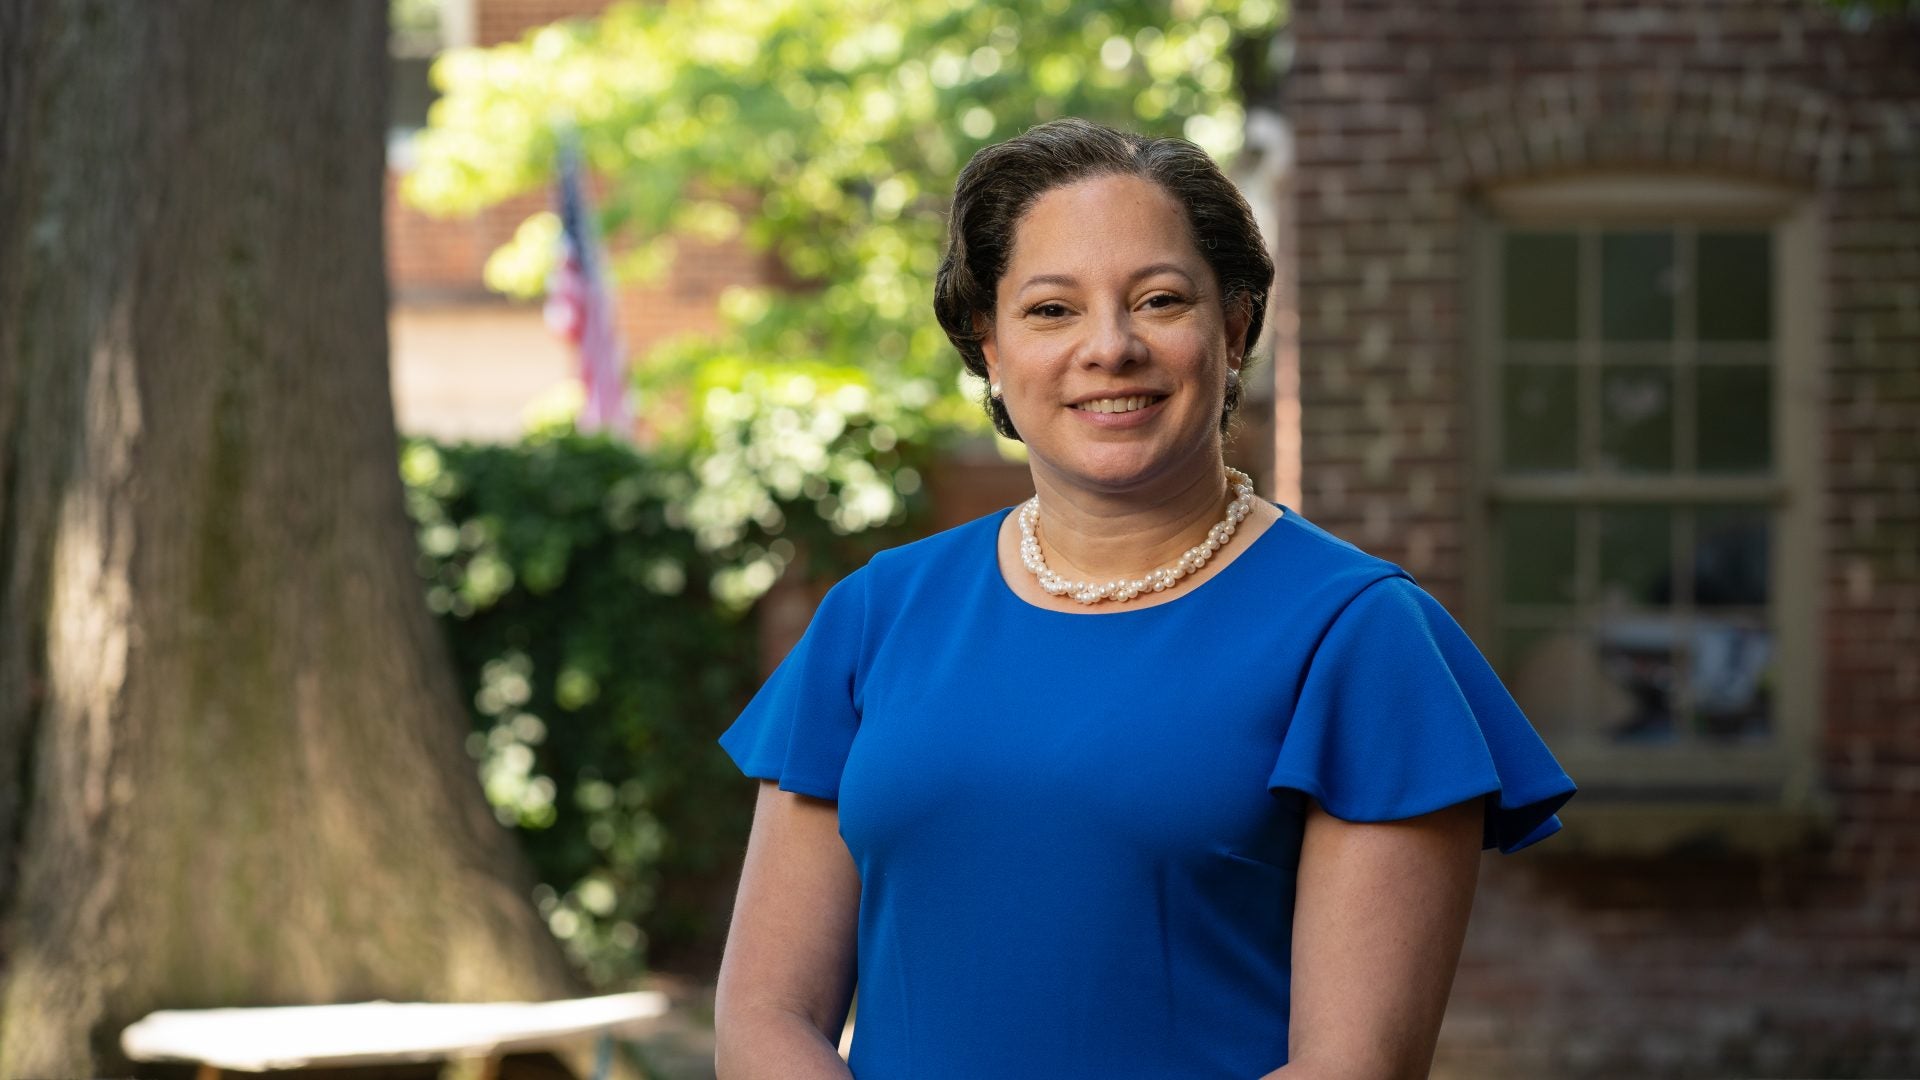 If I Become Virginia's First Black Congresswoman, I Won’t Just Shatter A Glass Ceiling– I’ll Fight For Progress